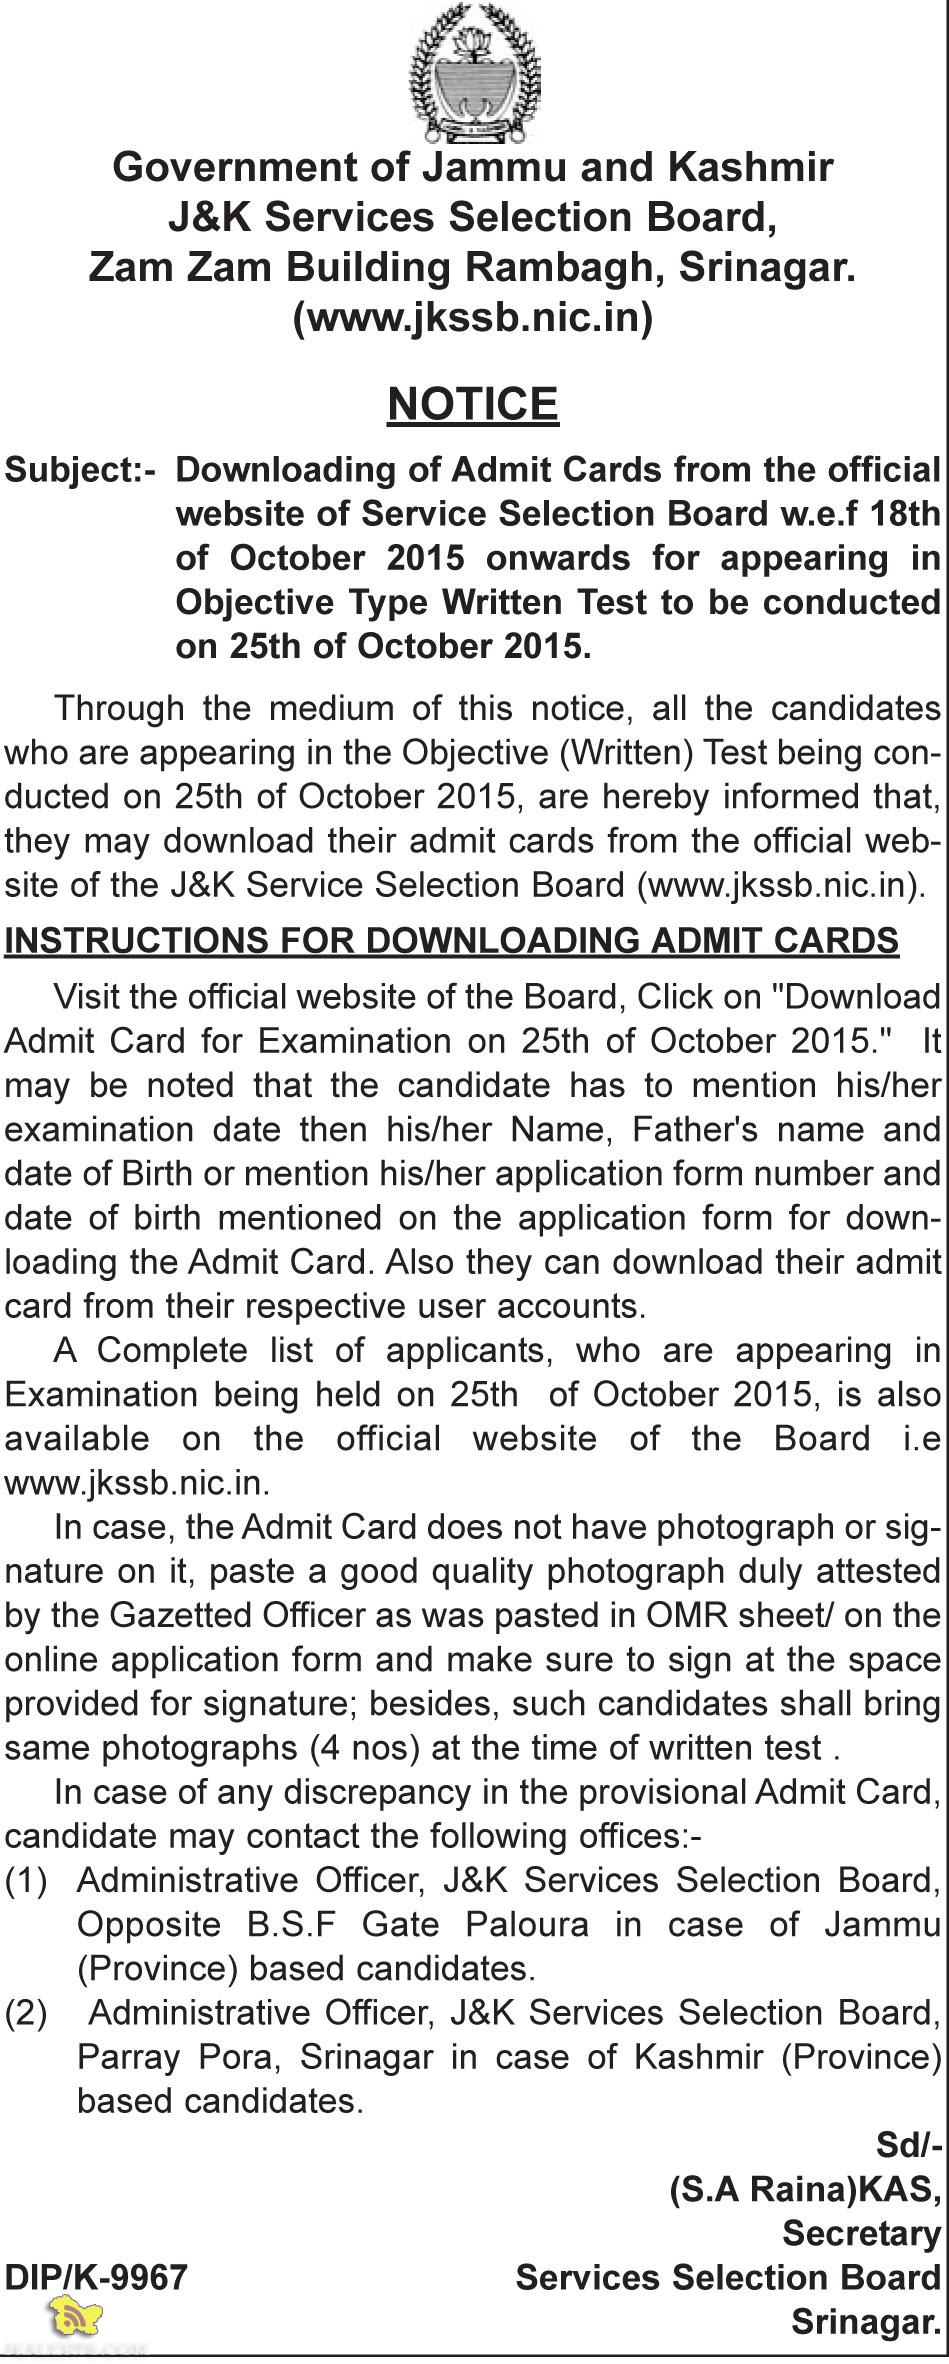 JKSSB Download Admit Cards for appearing in Test on 25th of October 2015.